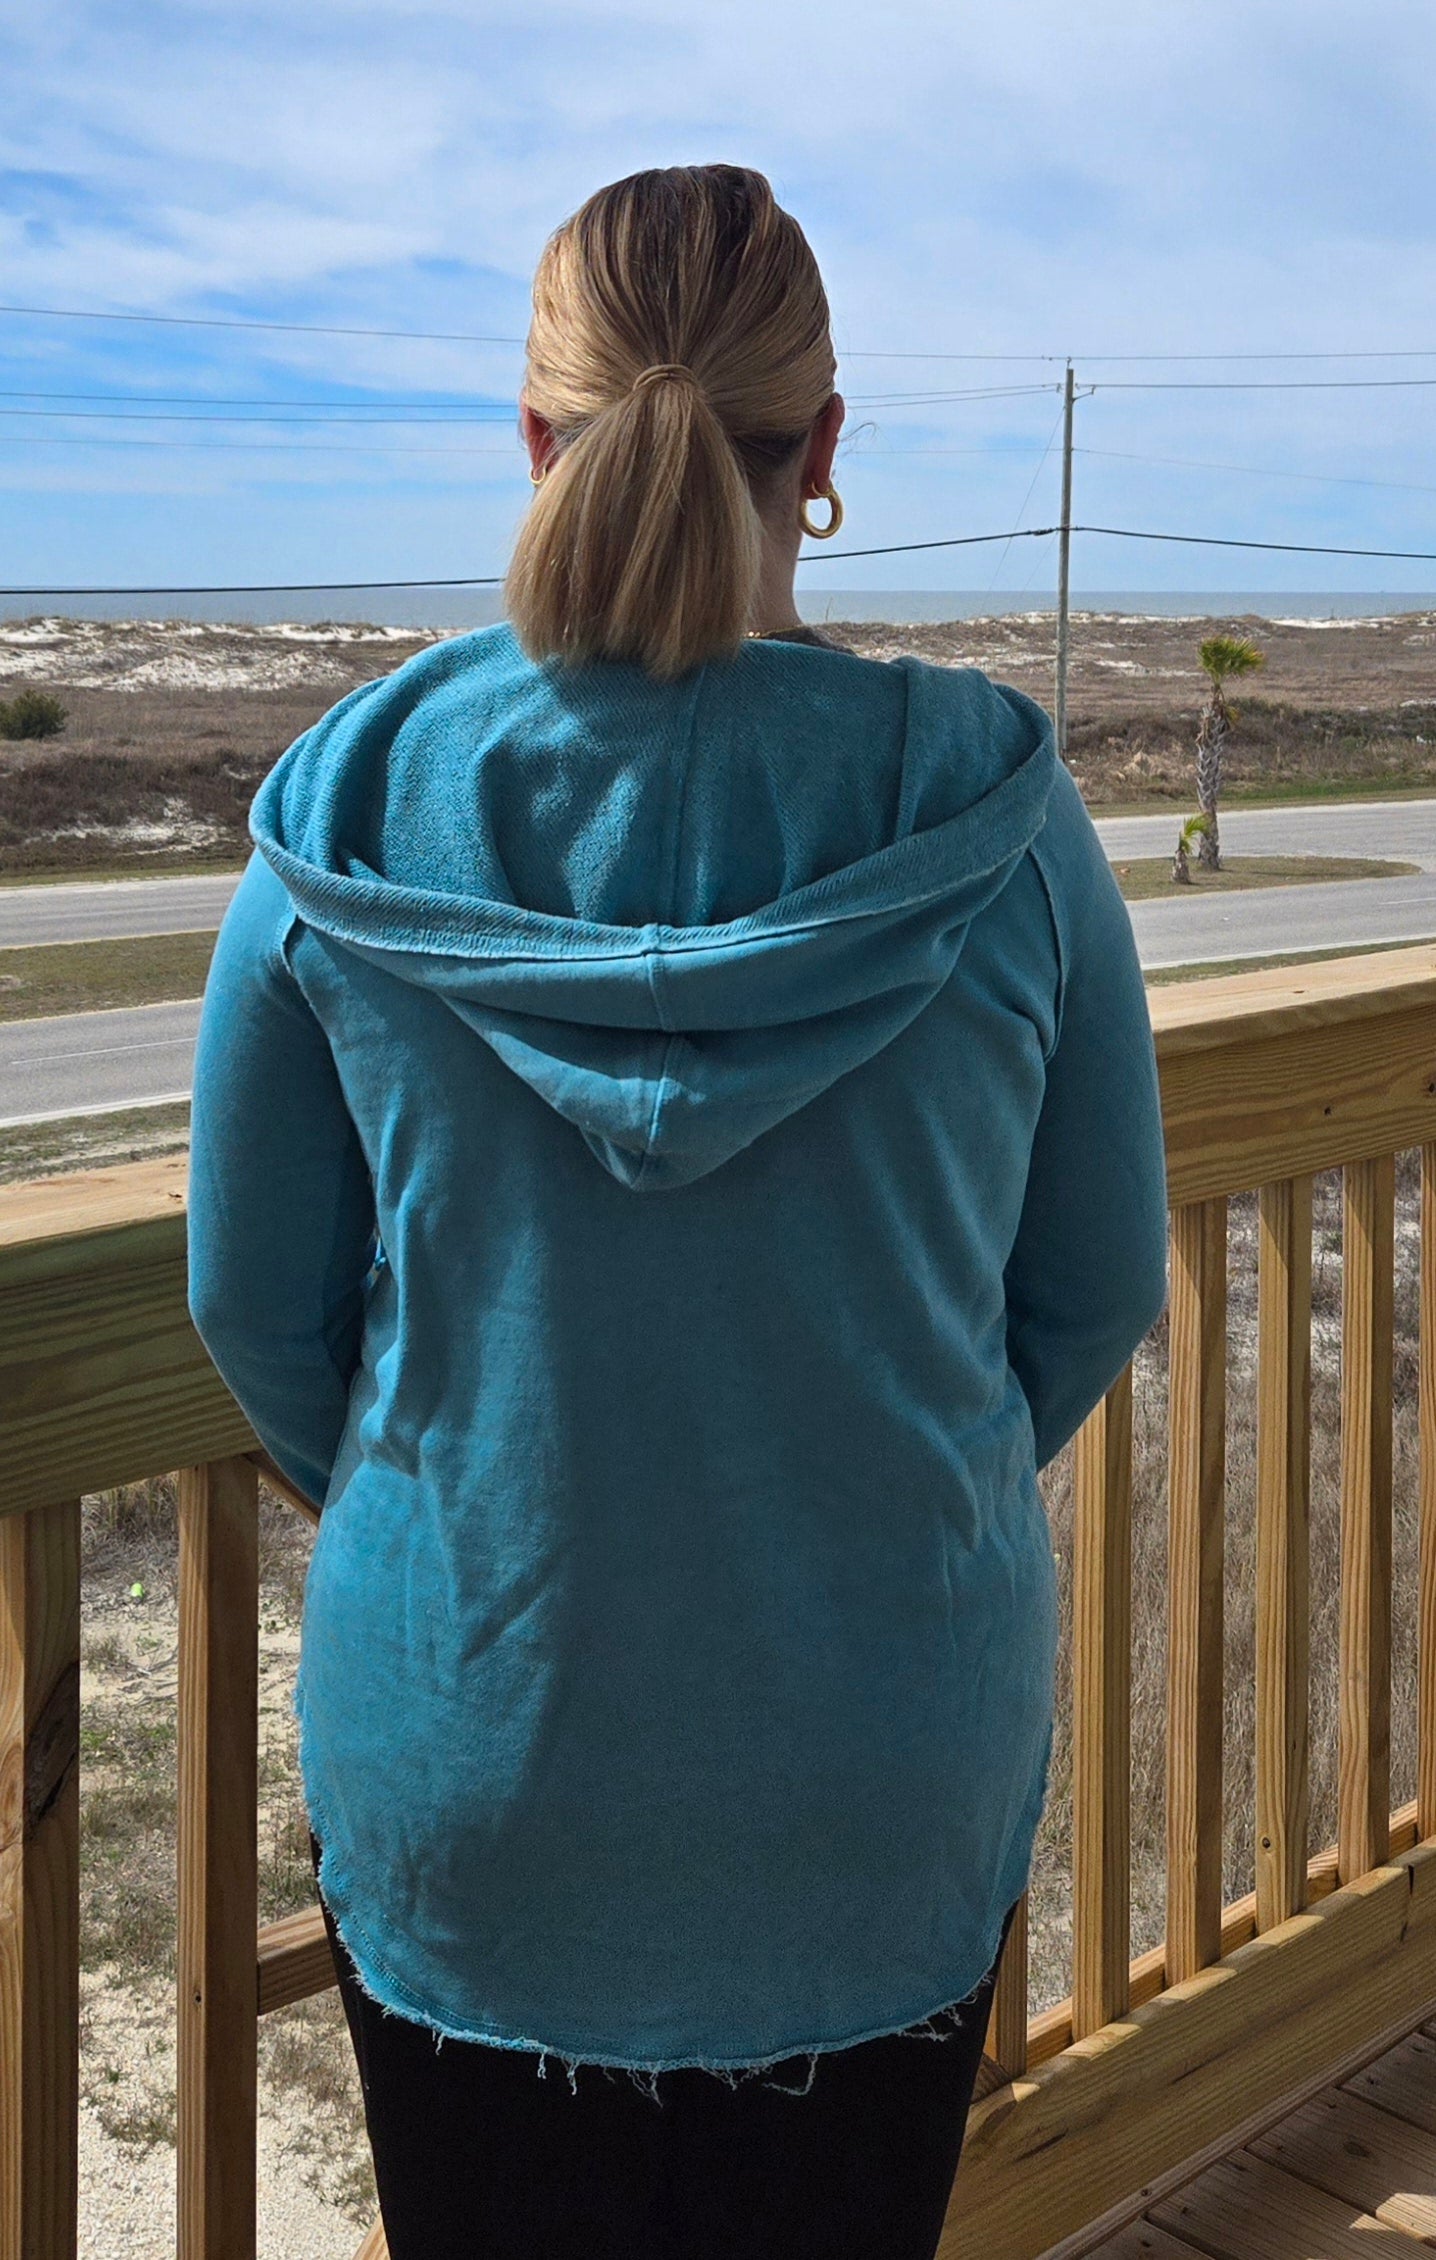 SALTWATER HEALS EVERYTHING TERRY CLOTH HOODIES